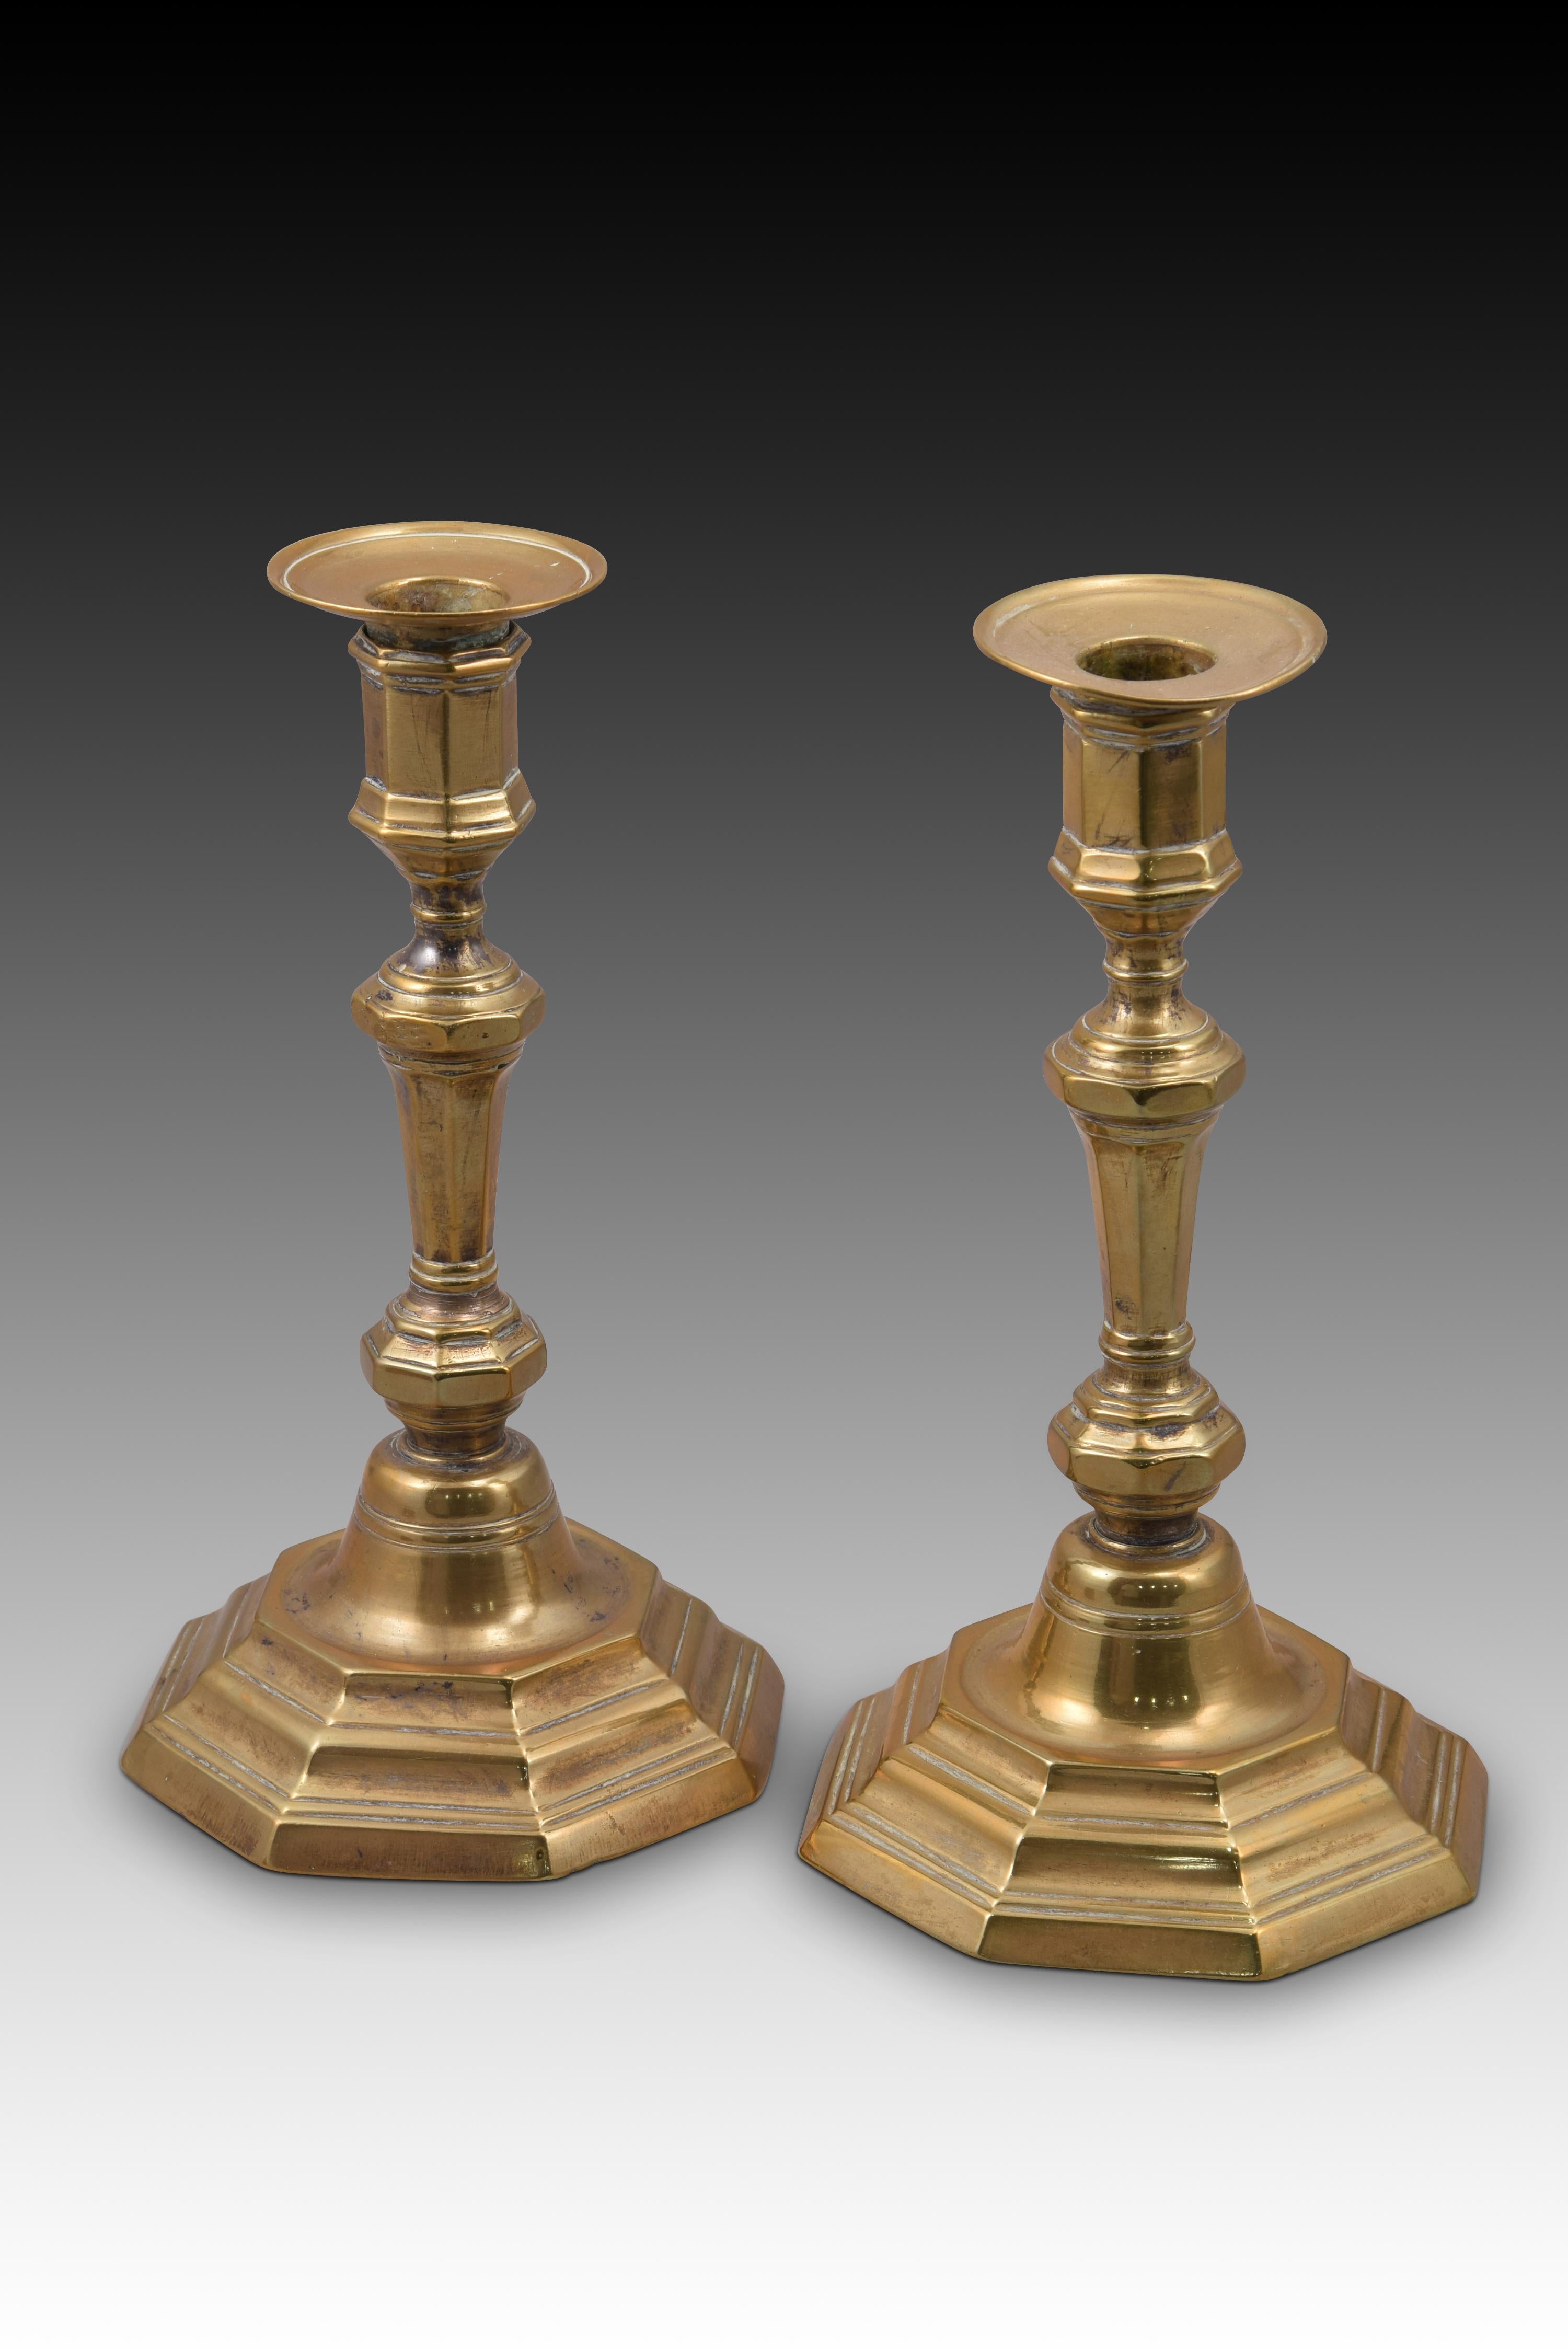 Pair of candlesticks. Bronze. France, 18th century. 
Pair of candlesticks made of bronze that have a polygonal base, stepped upwards and towards the center and enhanced with smooth moldings, a balustraded axis (also with a polygonal section), and an